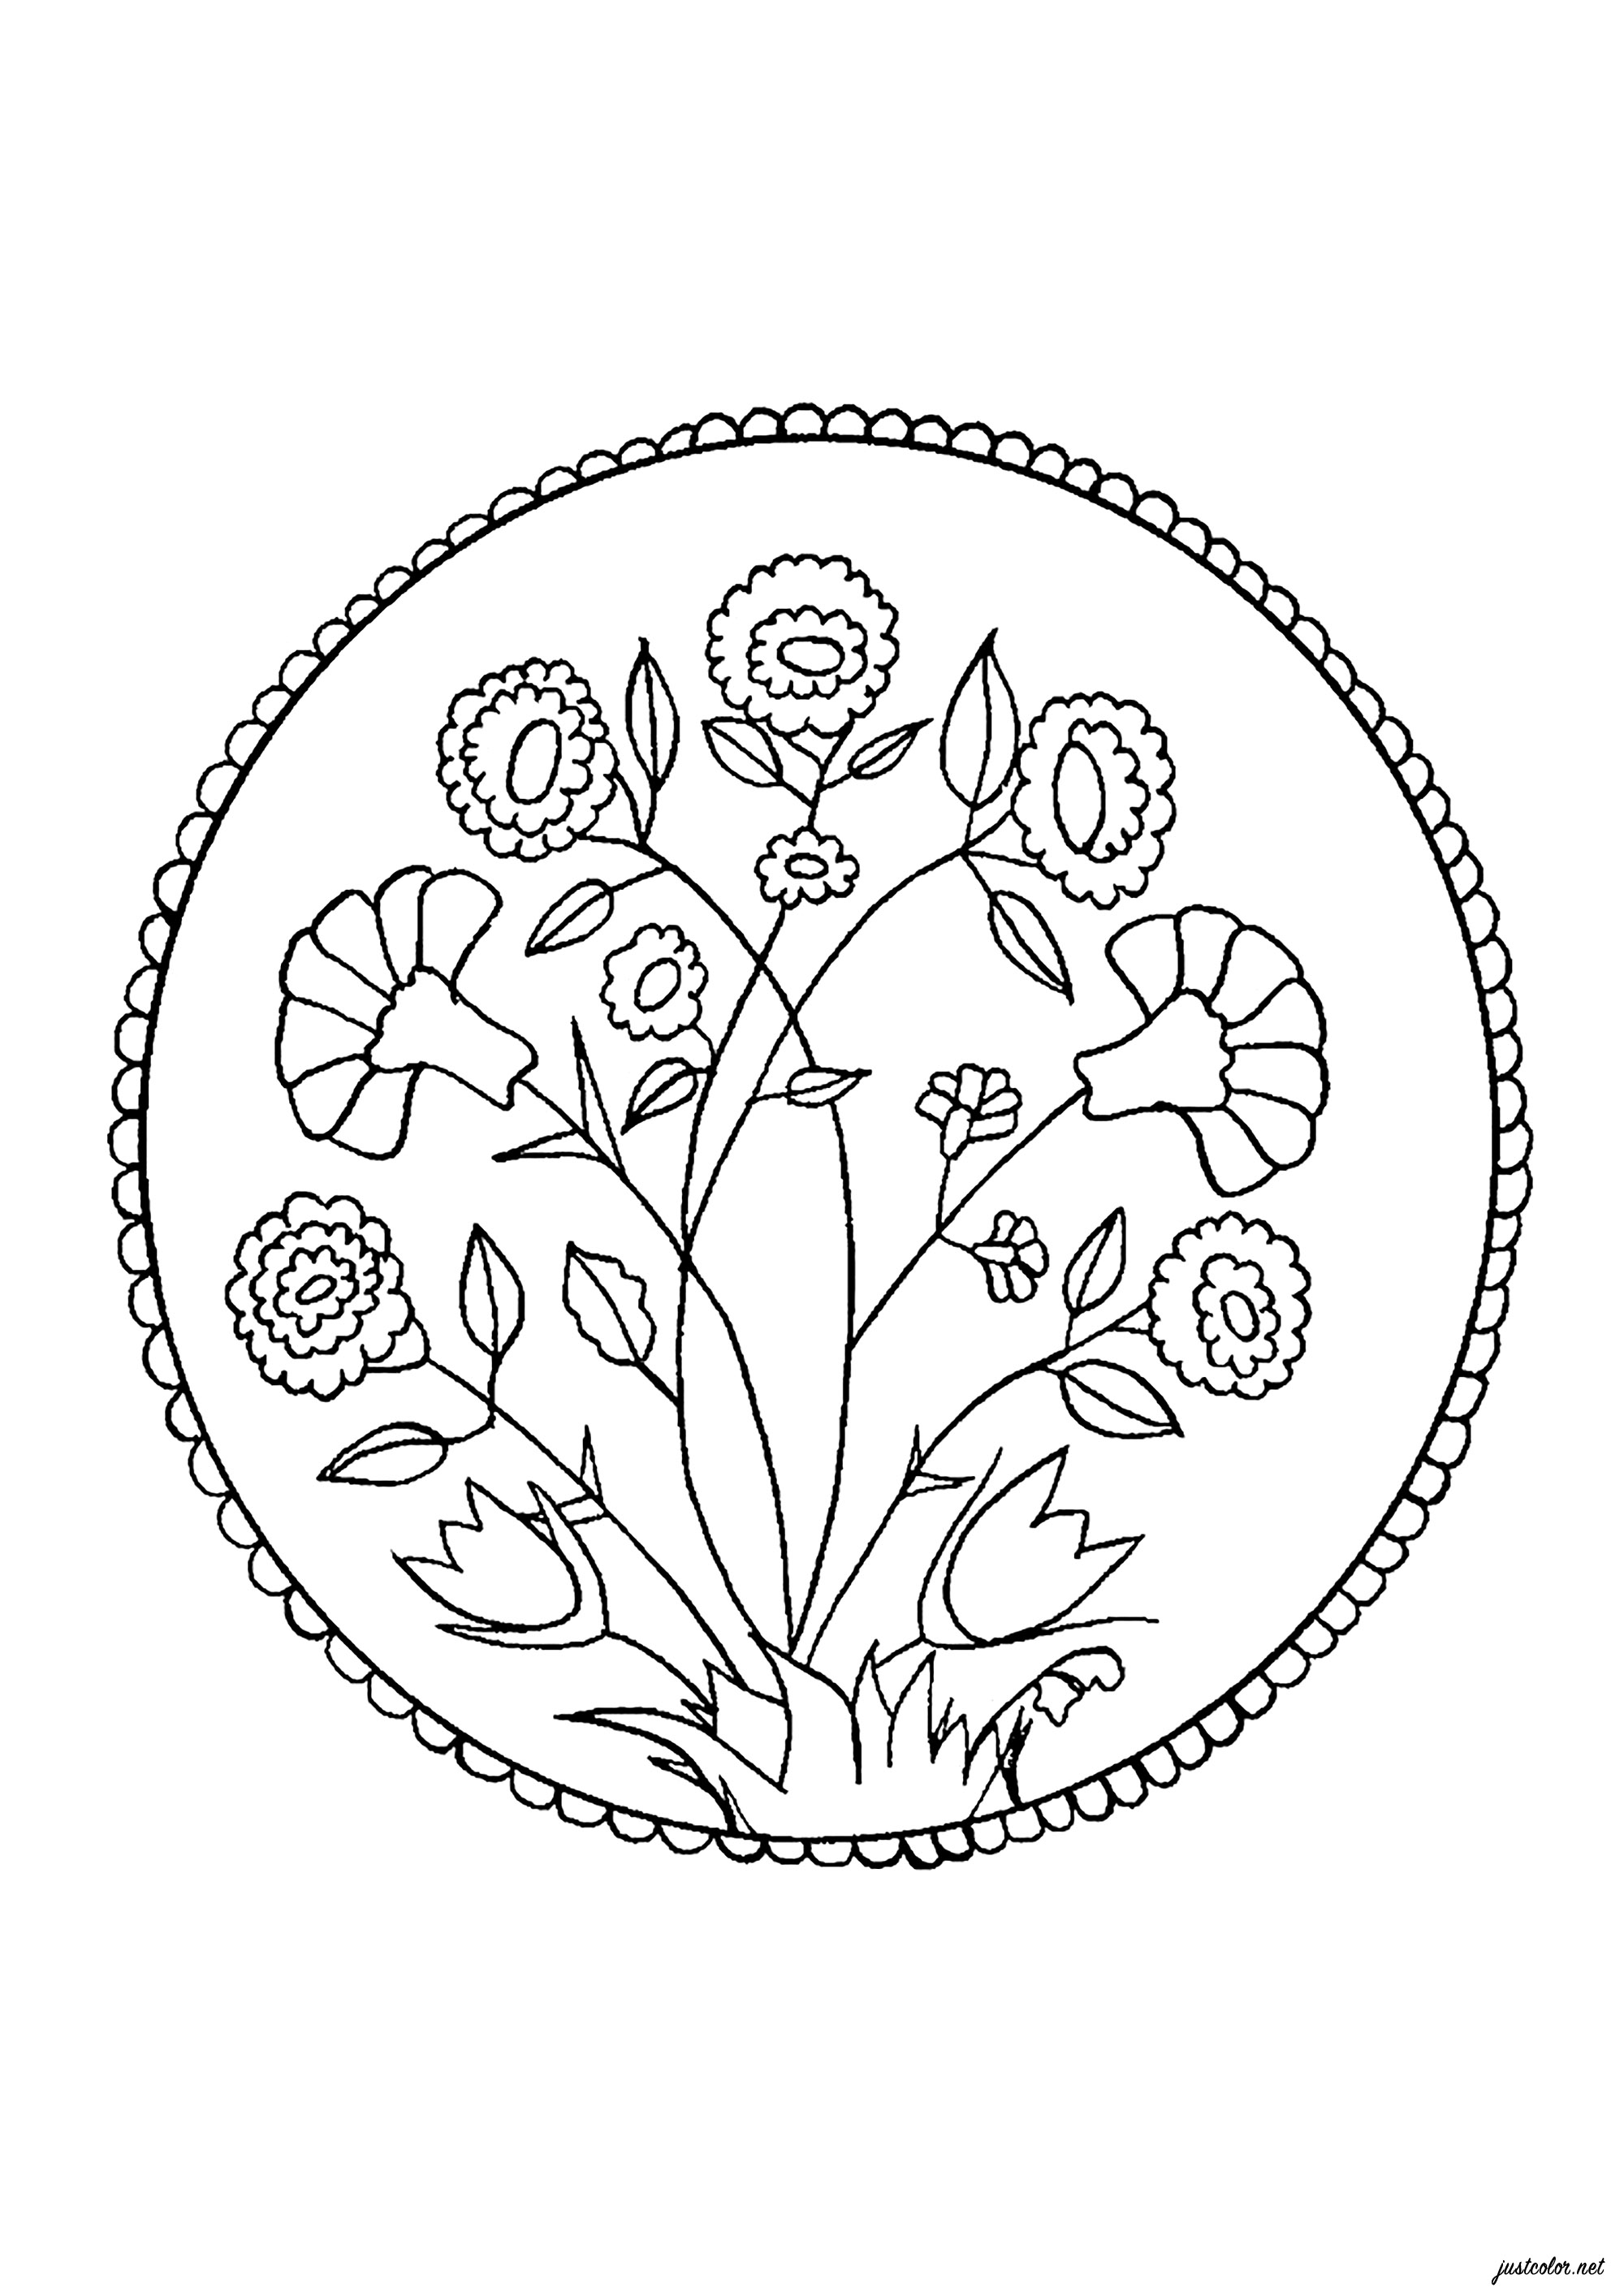 Coloring inspired by a 16th century dish representing various plants and flowers. Each element is presented in great detail and offers you the possibility to relax by coloring them in the colors of your choice.